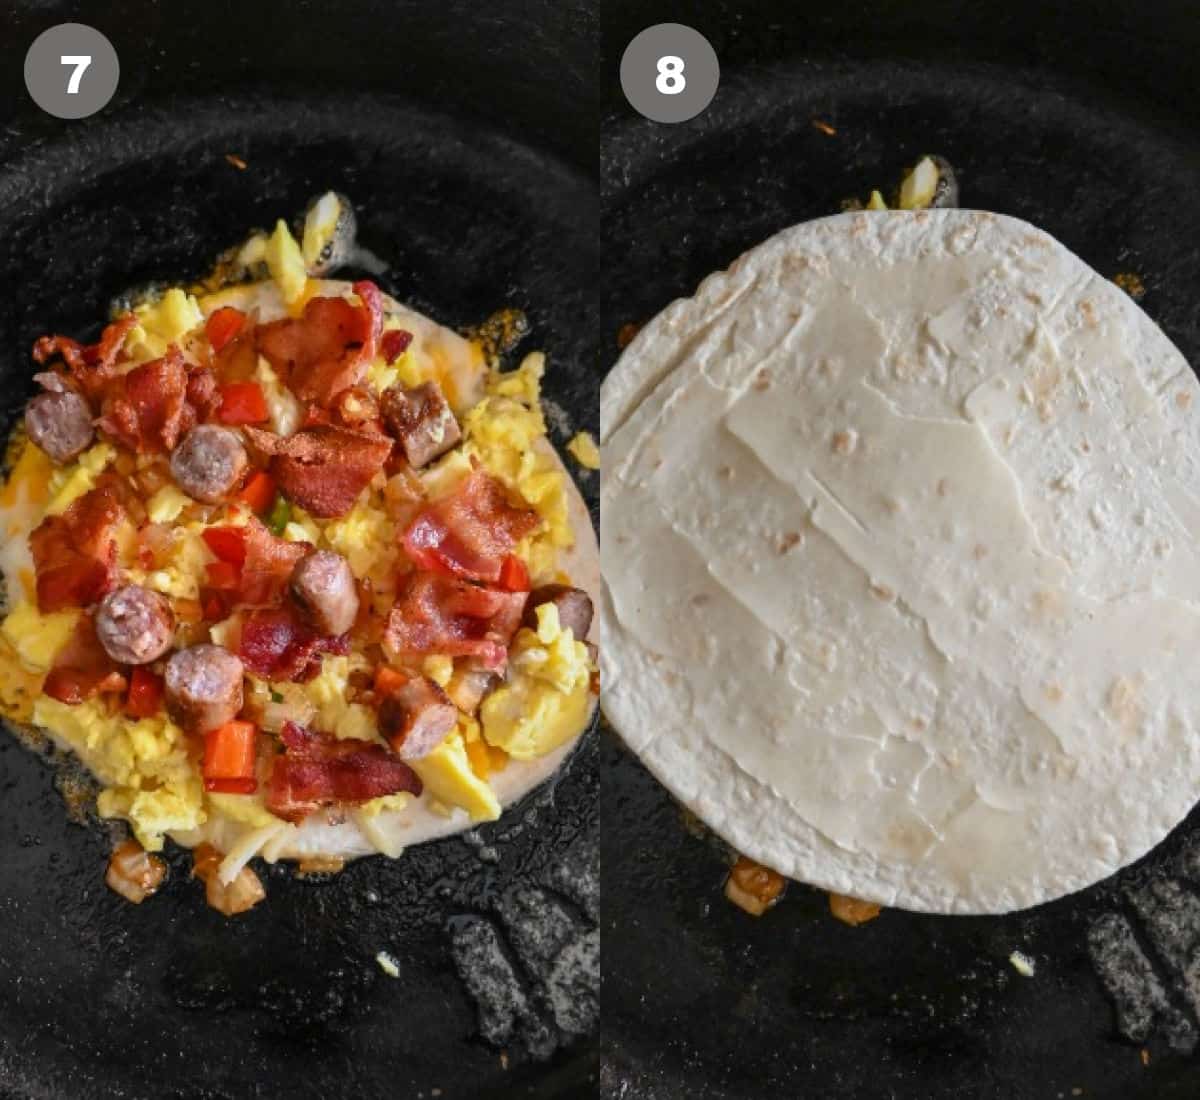 Additional toppings added to the cheese then another buttered tortilla on top.